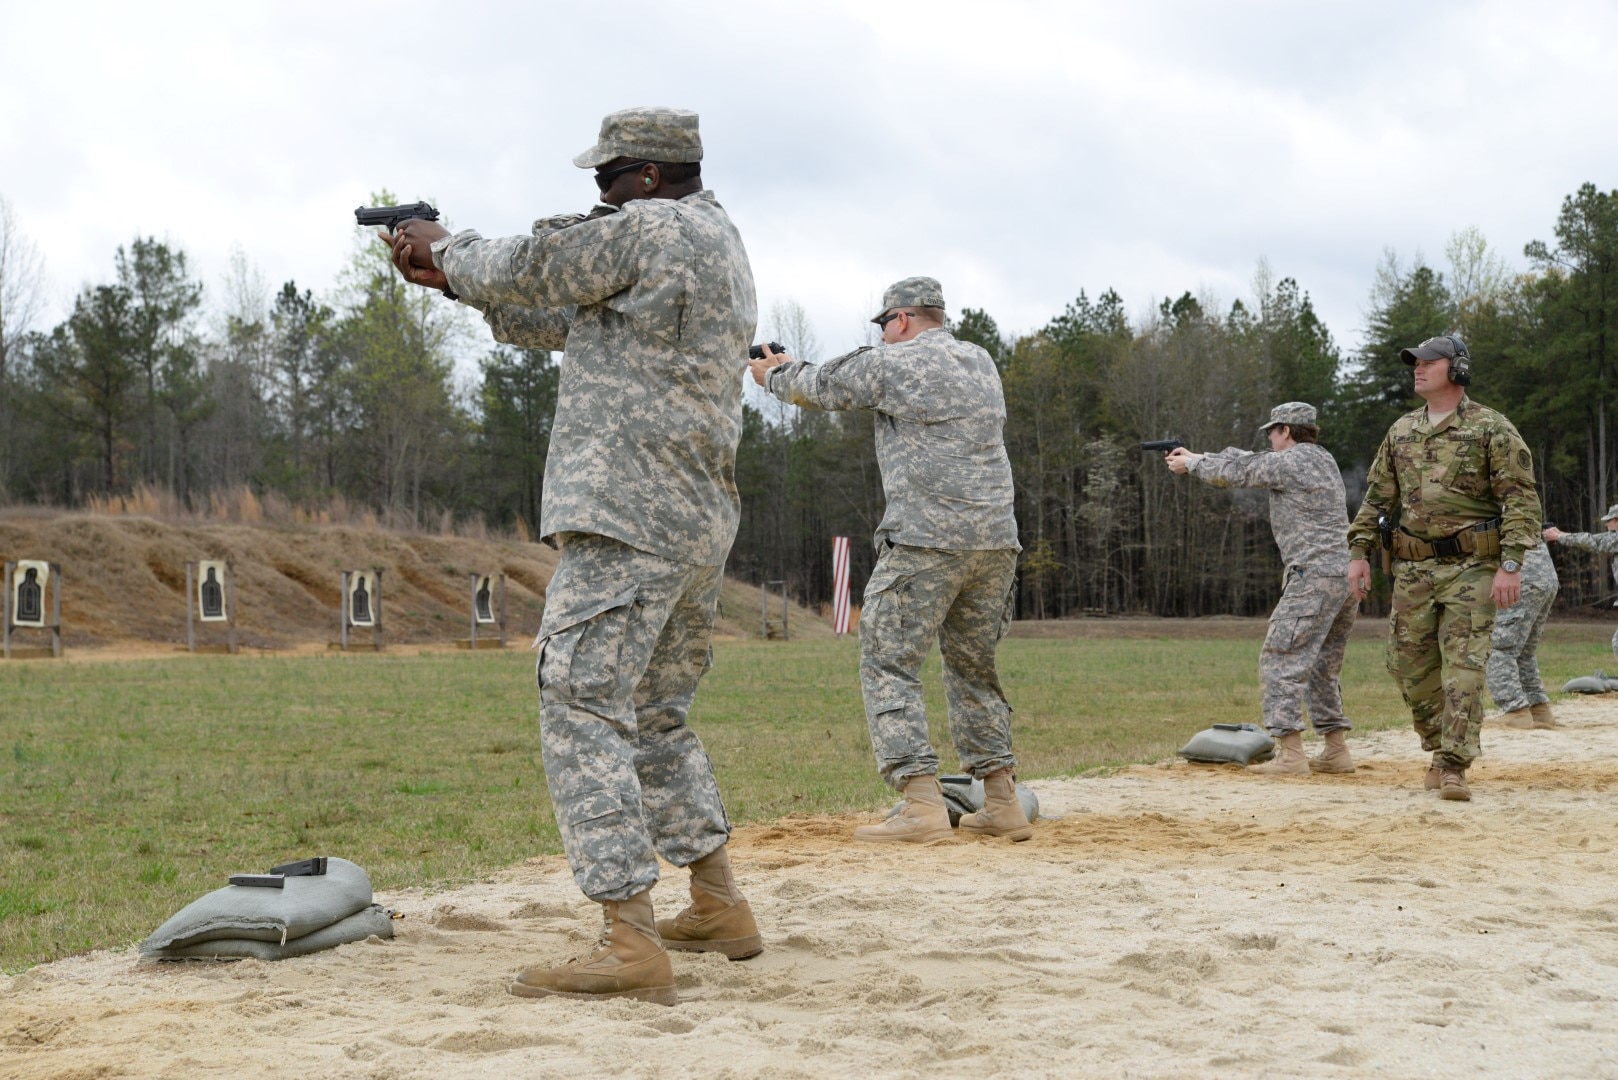 DLA JRF members fire M9 pistols during weapons training April 1 at Fort A.P. Hill, Va. The goal was to gain familiarization with the weapons for combat readiness and to qualify for deployments.